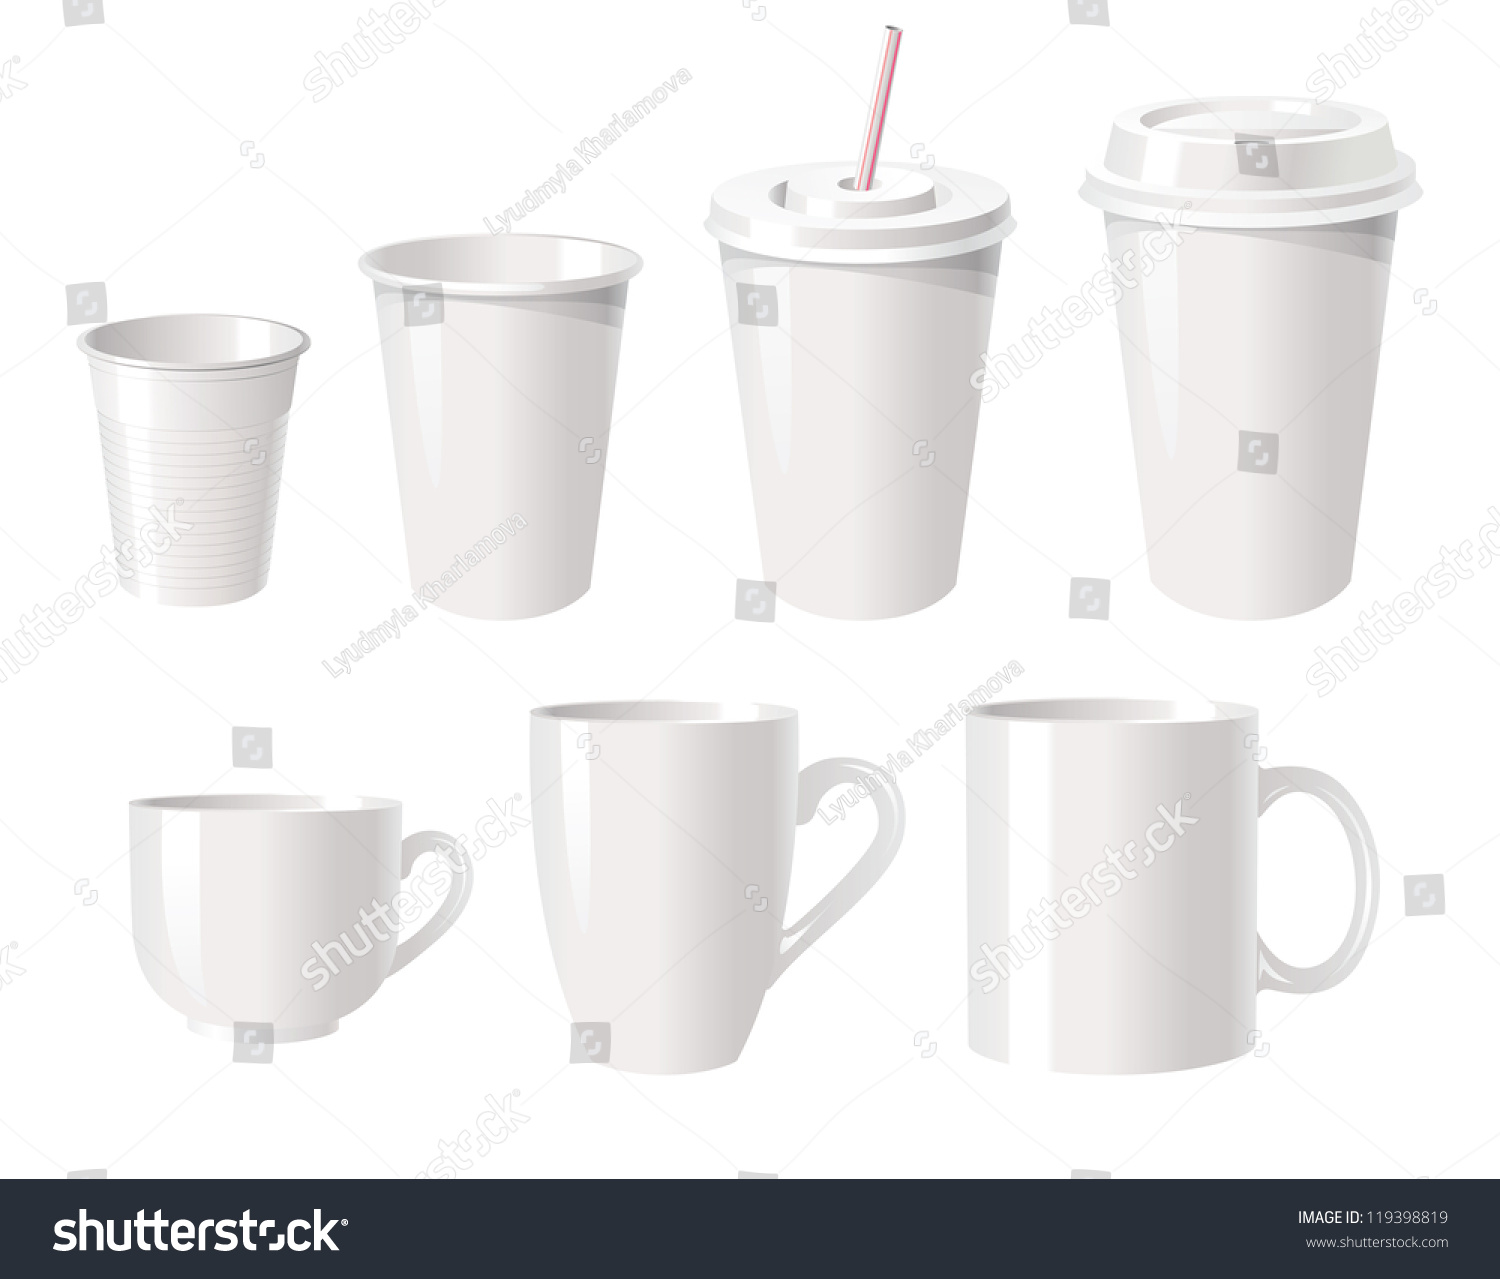 SVG of Collection of various white coffee cups isolated on white background, vector illustration svg